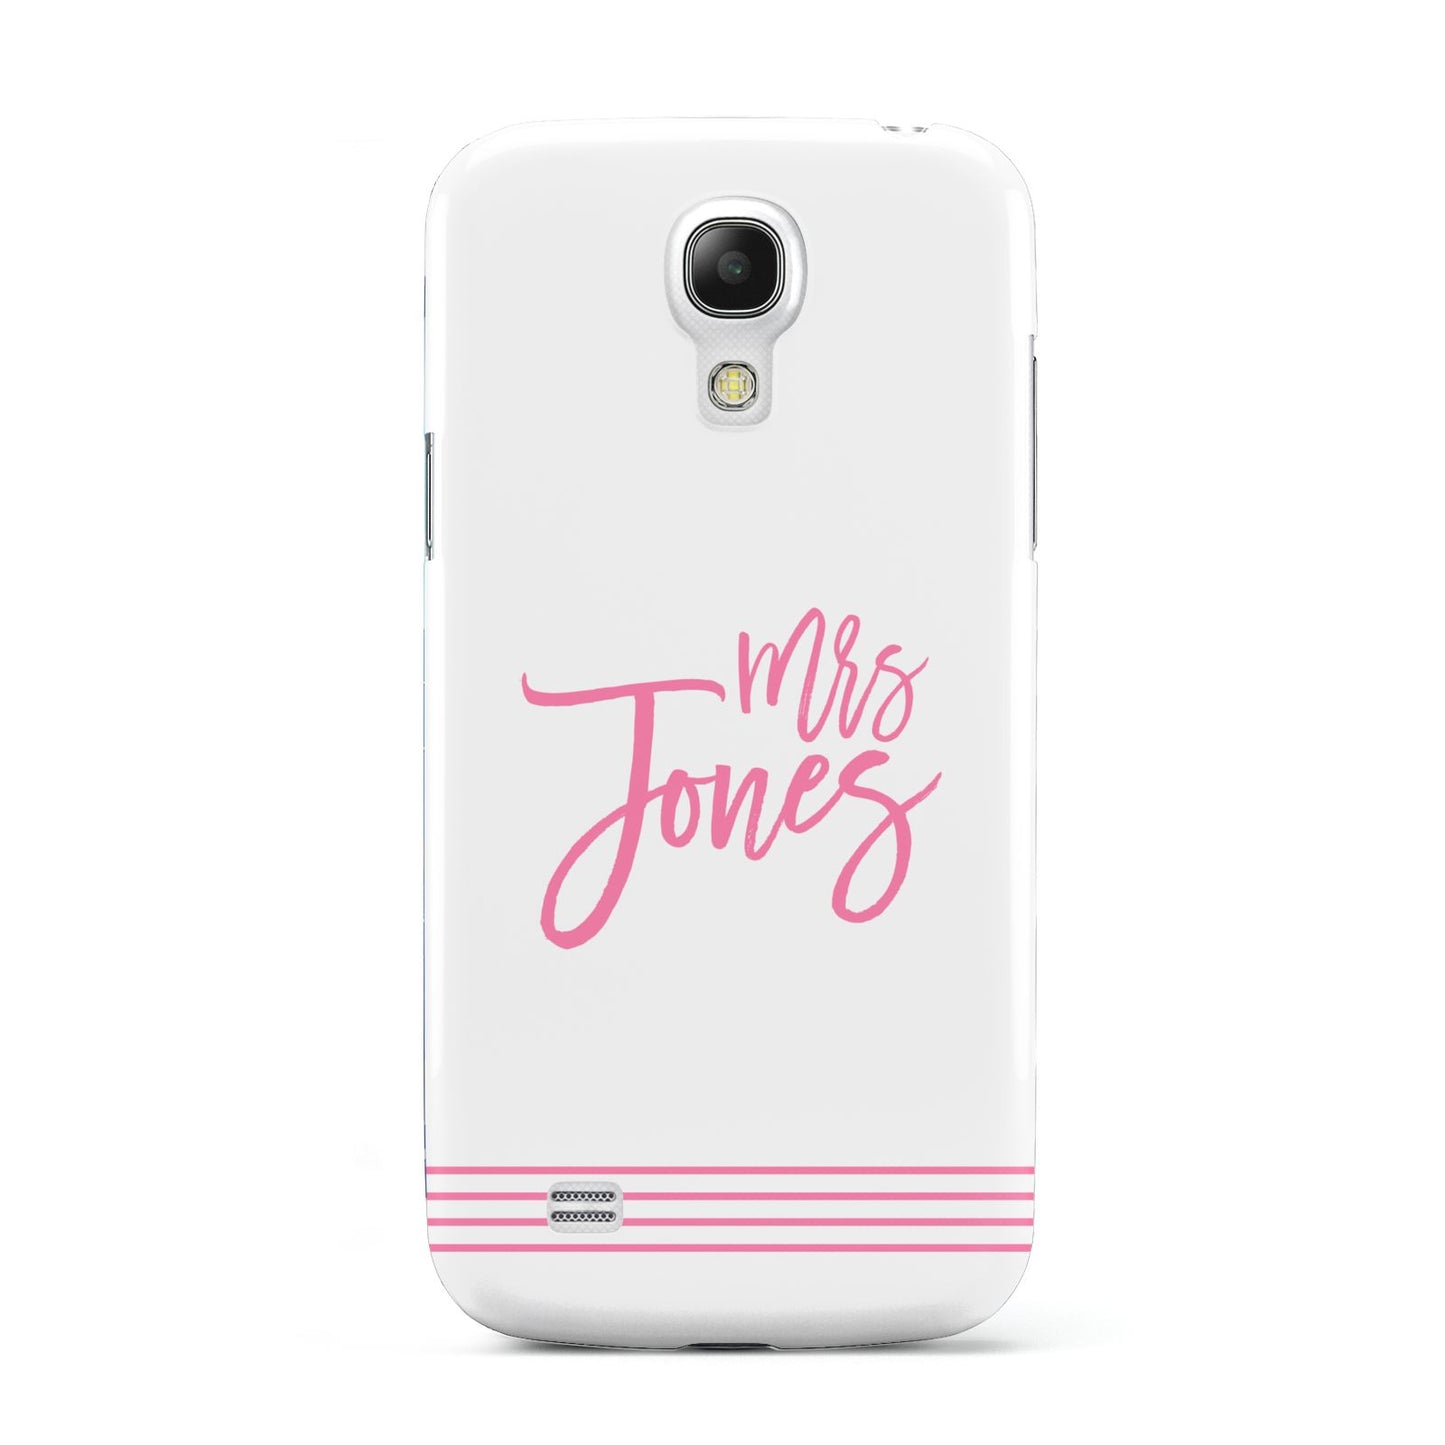 Personalised Hers Samsung Galaxy S4 Mini Case